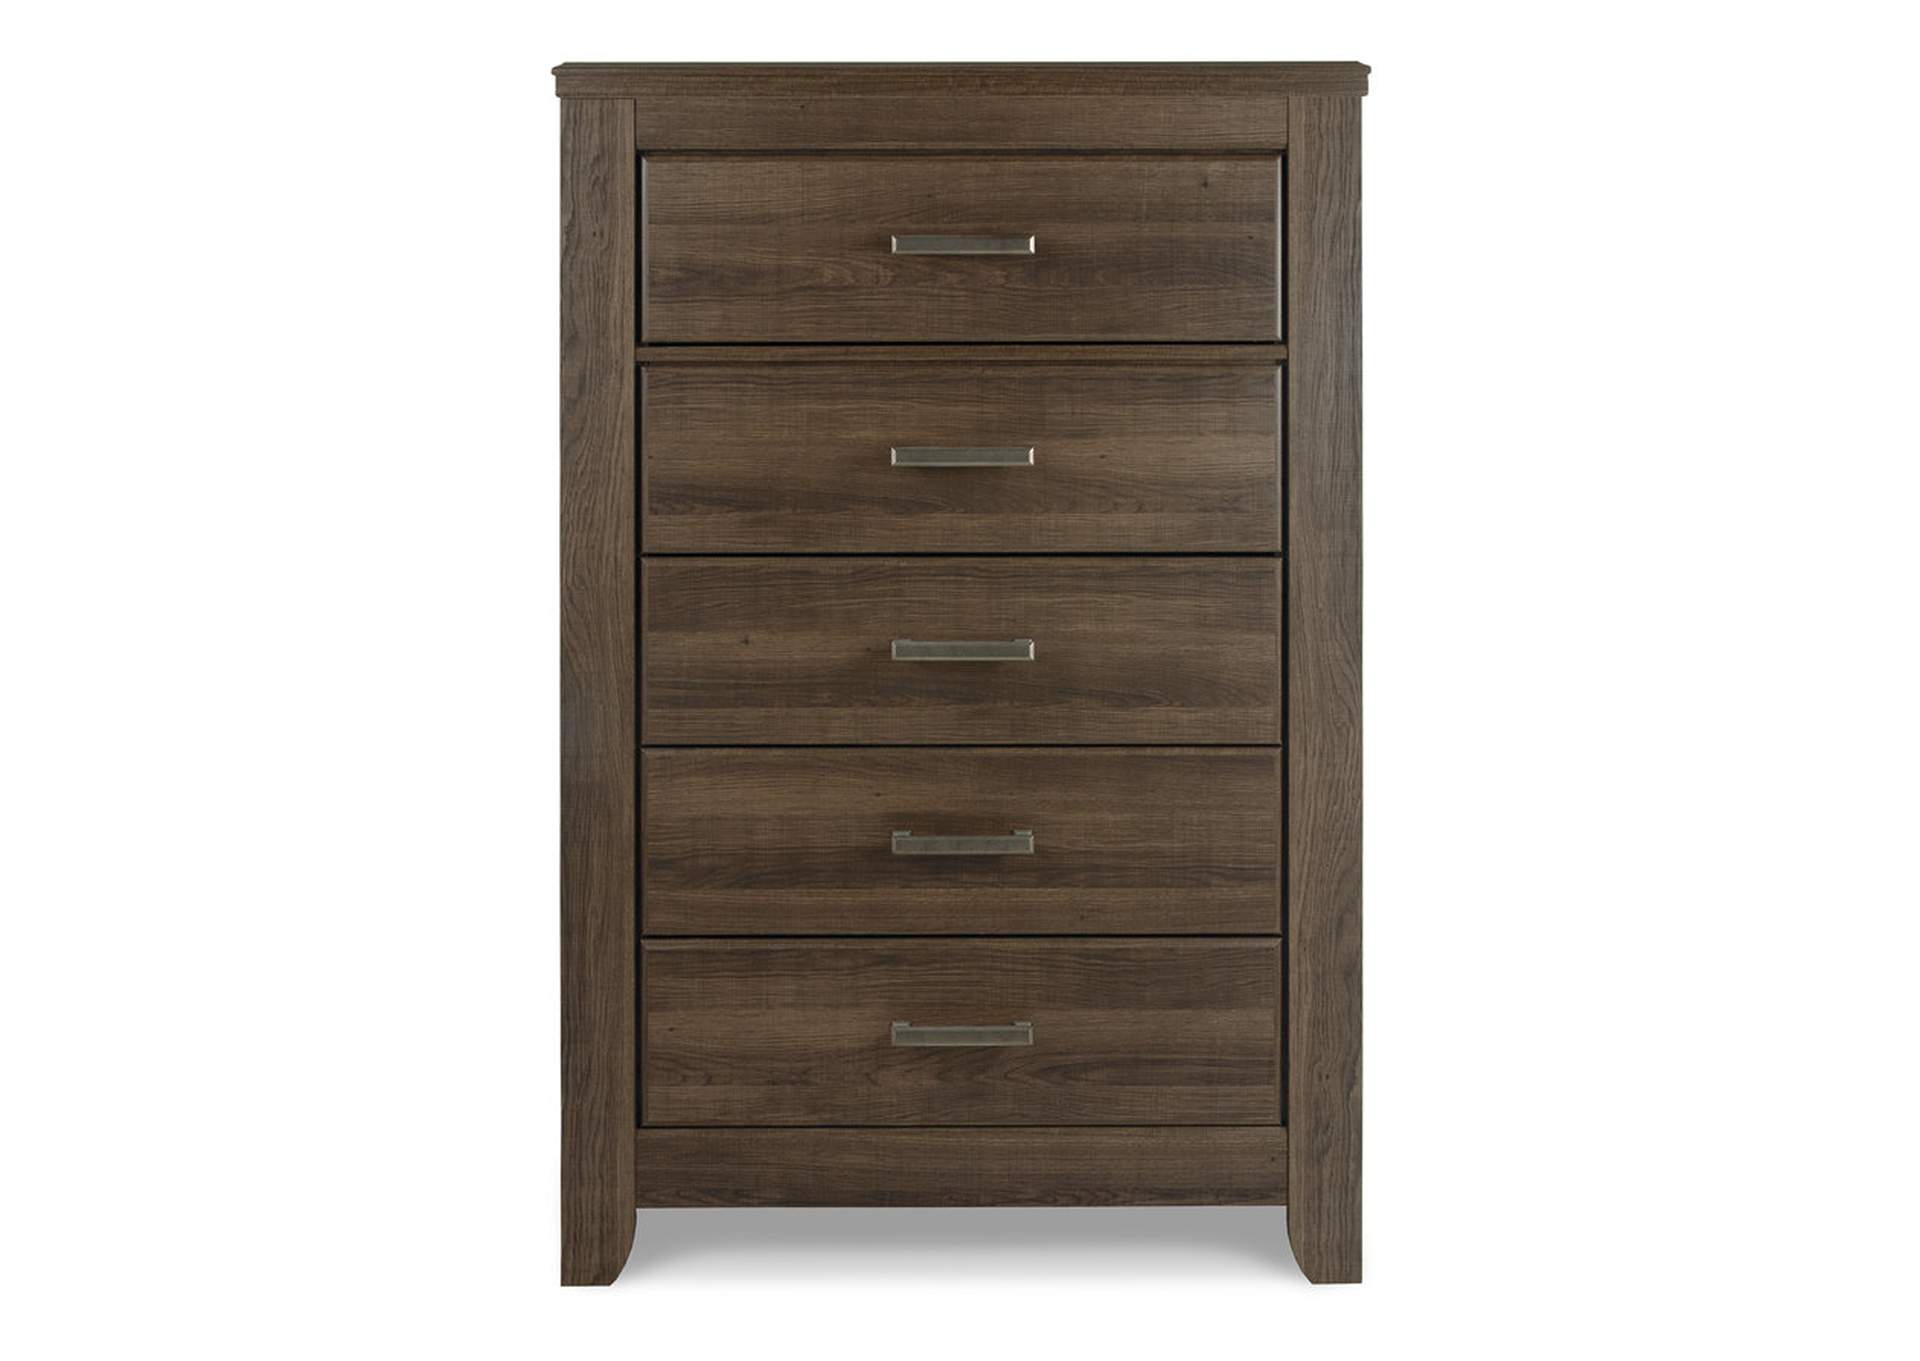 Juararo King Poster Bed, Dresser, Mirror, Chest and 2 Nightstands,Signature Design By Ashley